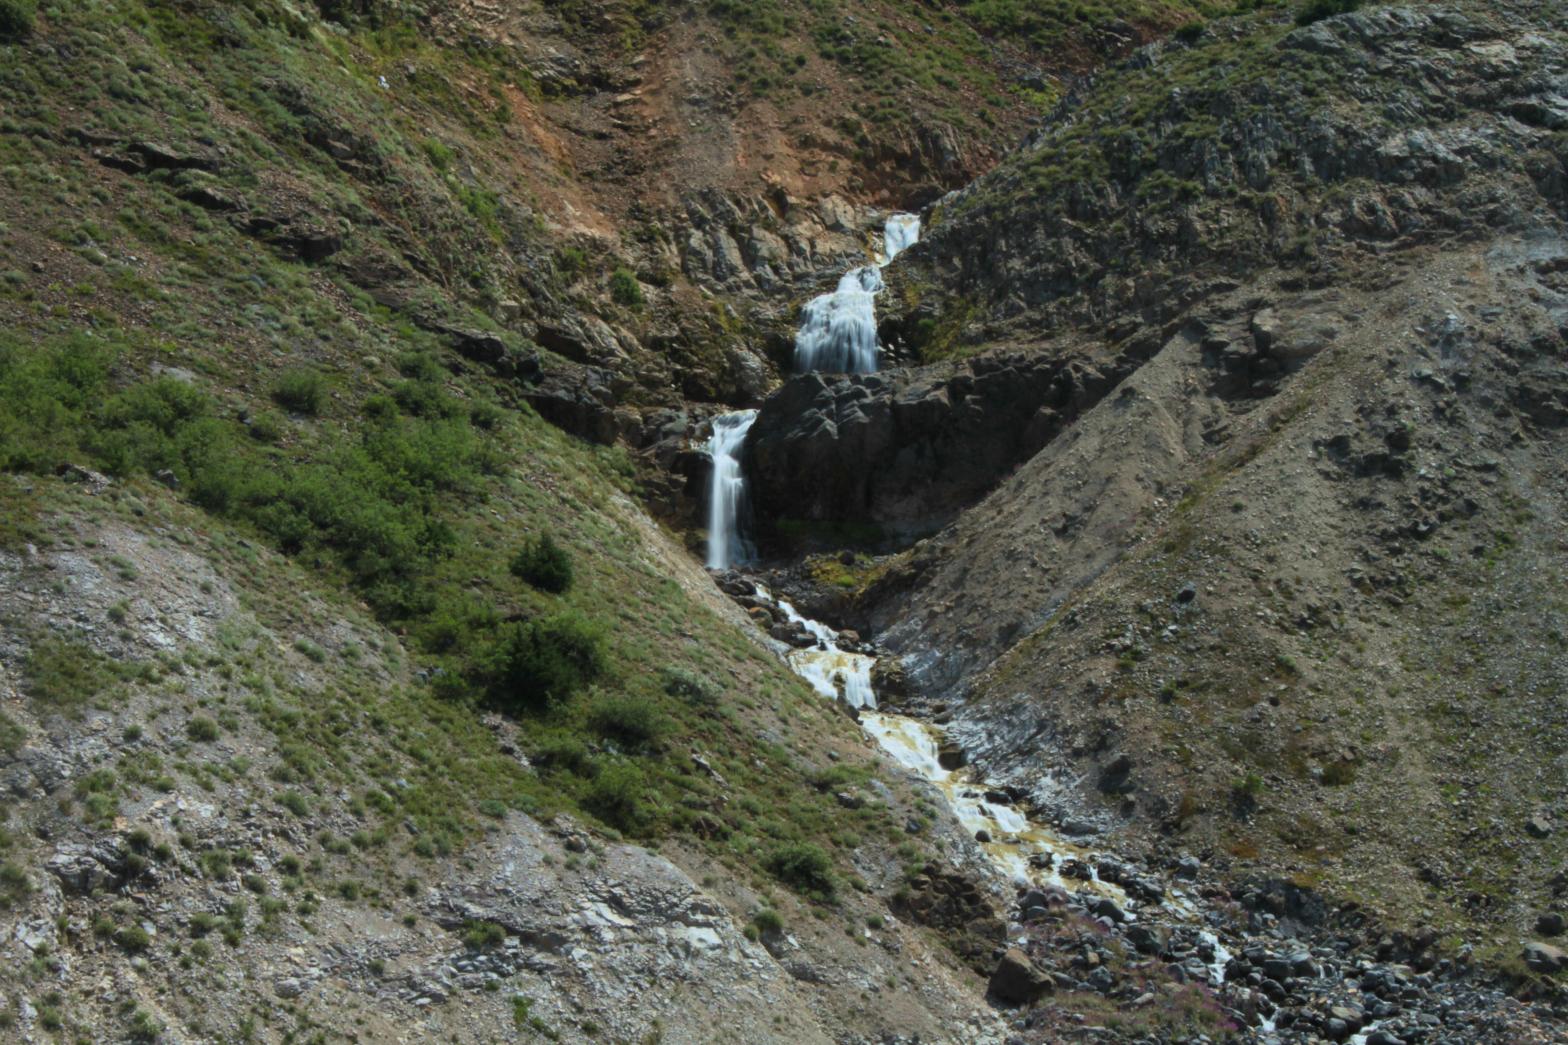 Alix Falls from across the valley